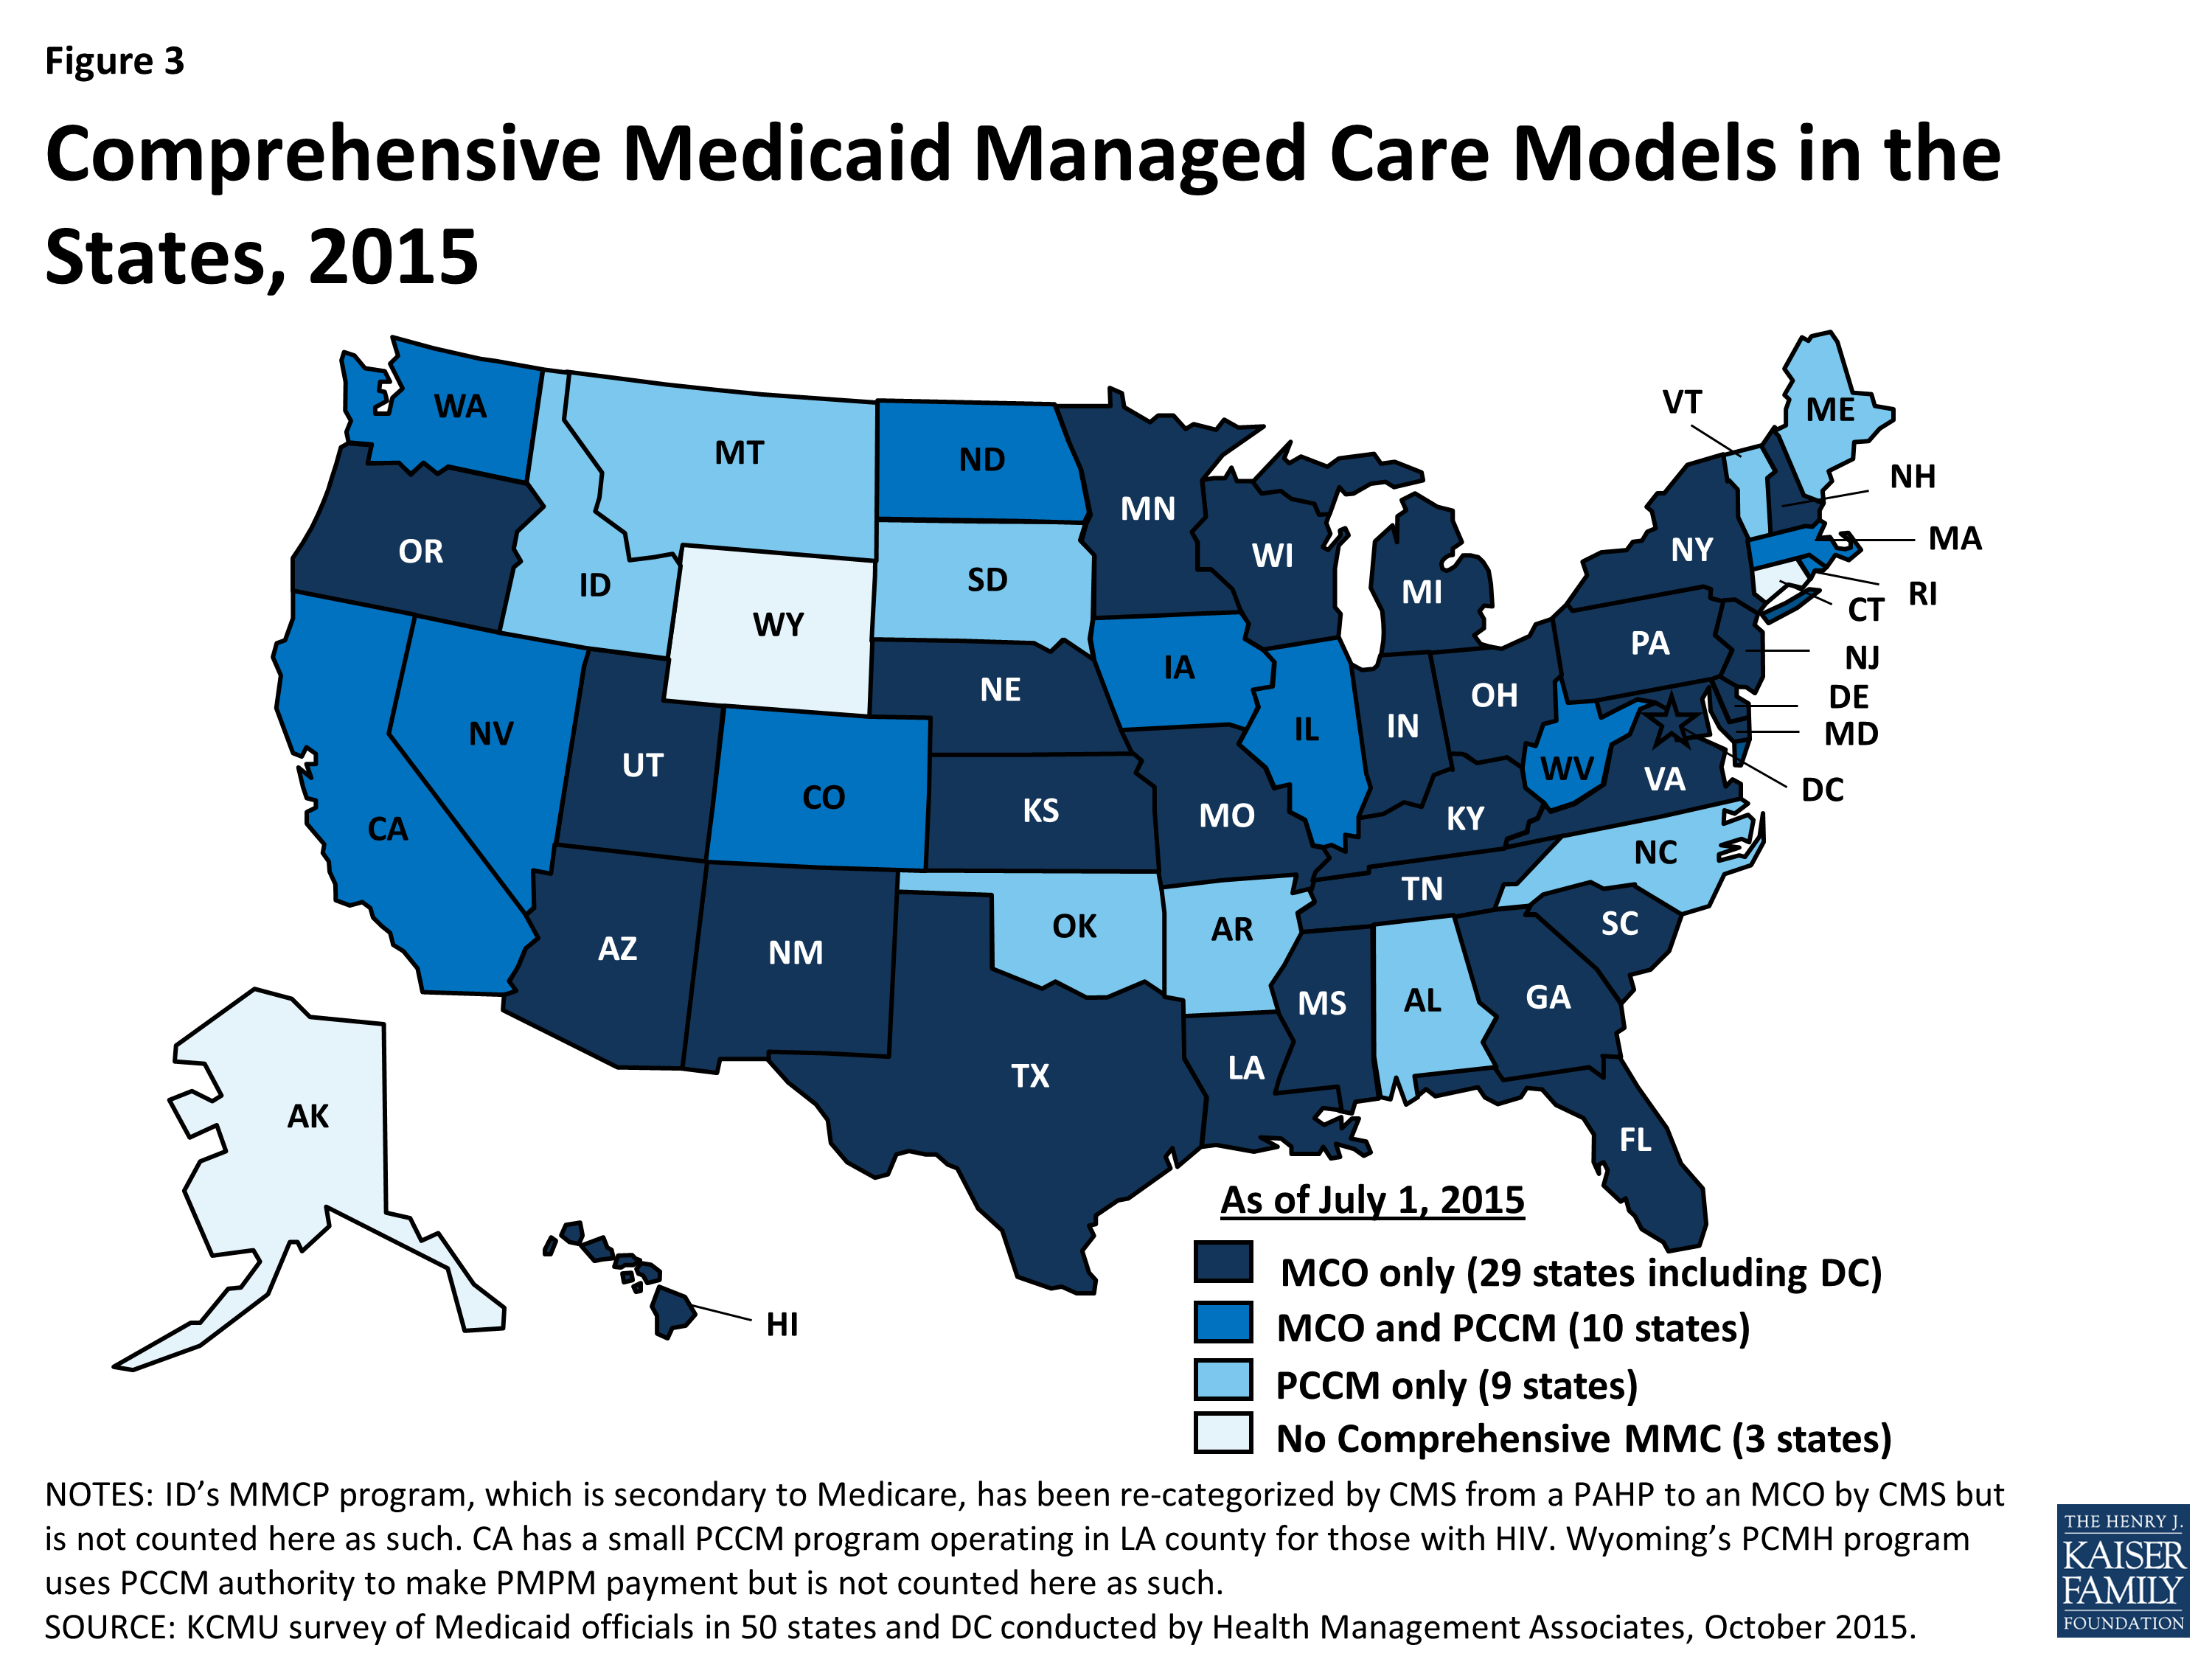 Medicaid Reforms to Expand Coverage, Control Costs and Improve Care